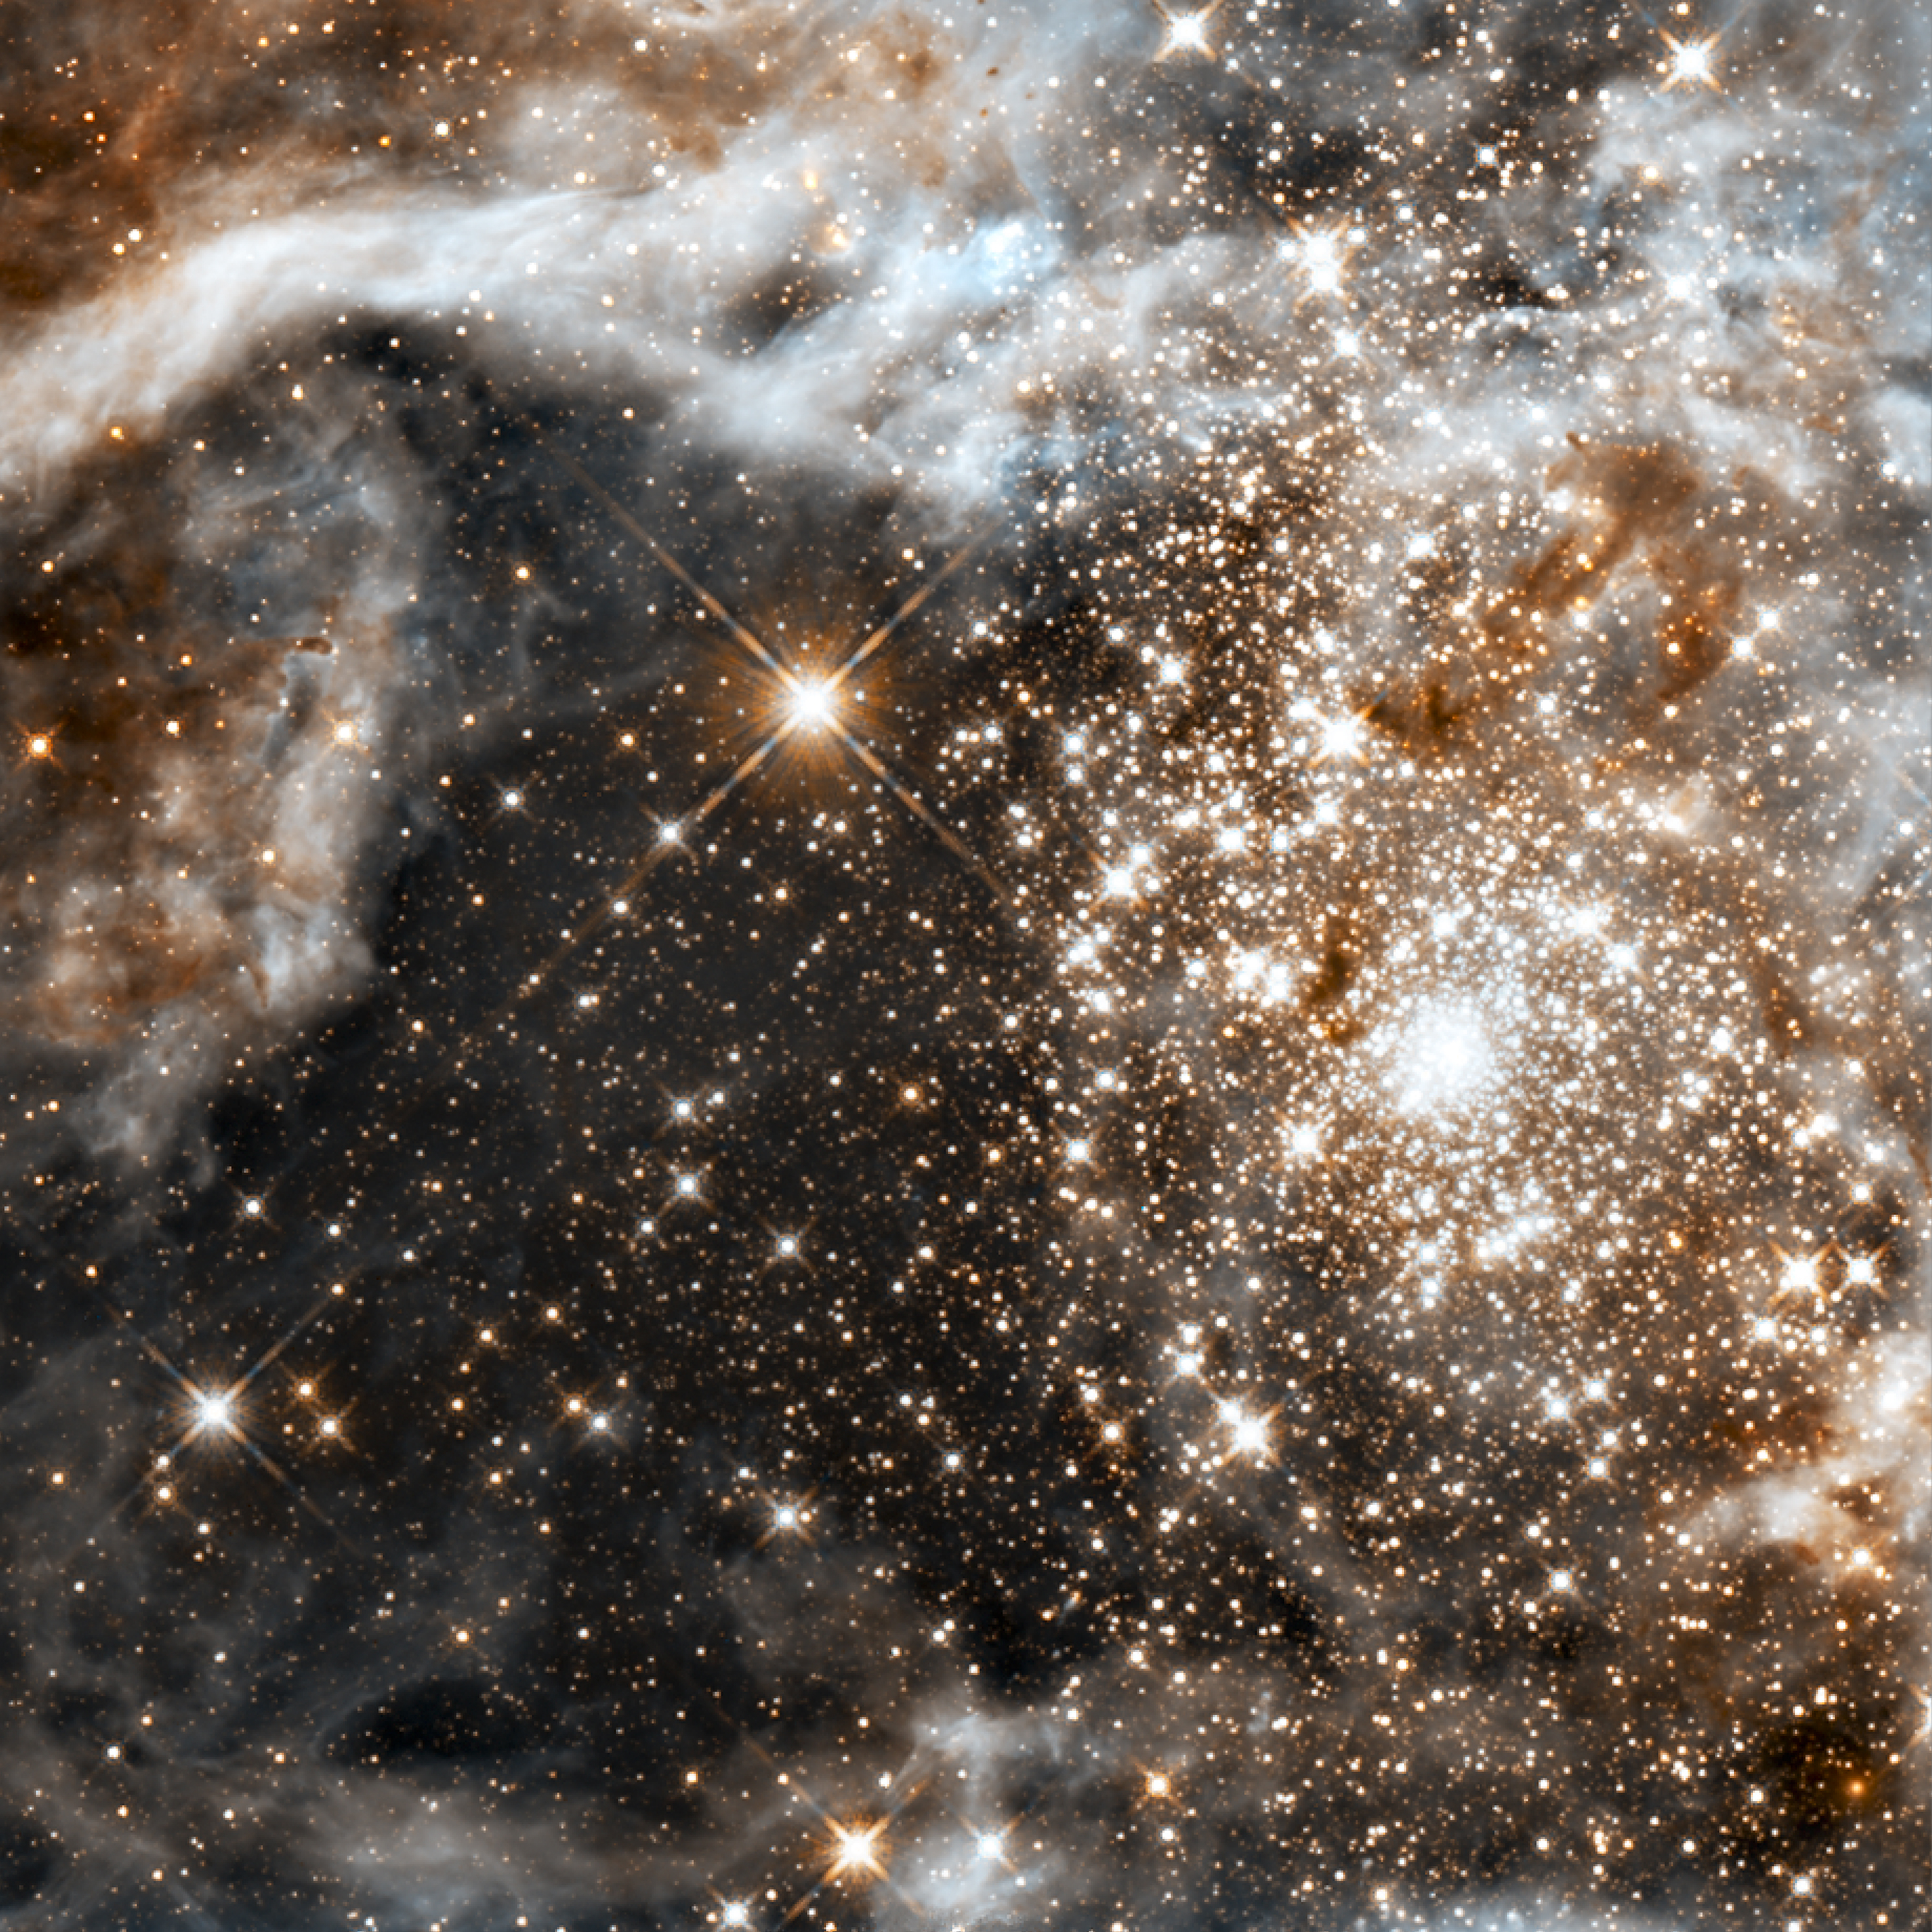 Grand star-forming region R136 in NGC 2070 (infrared, captured by the Hubble Space Telescope)